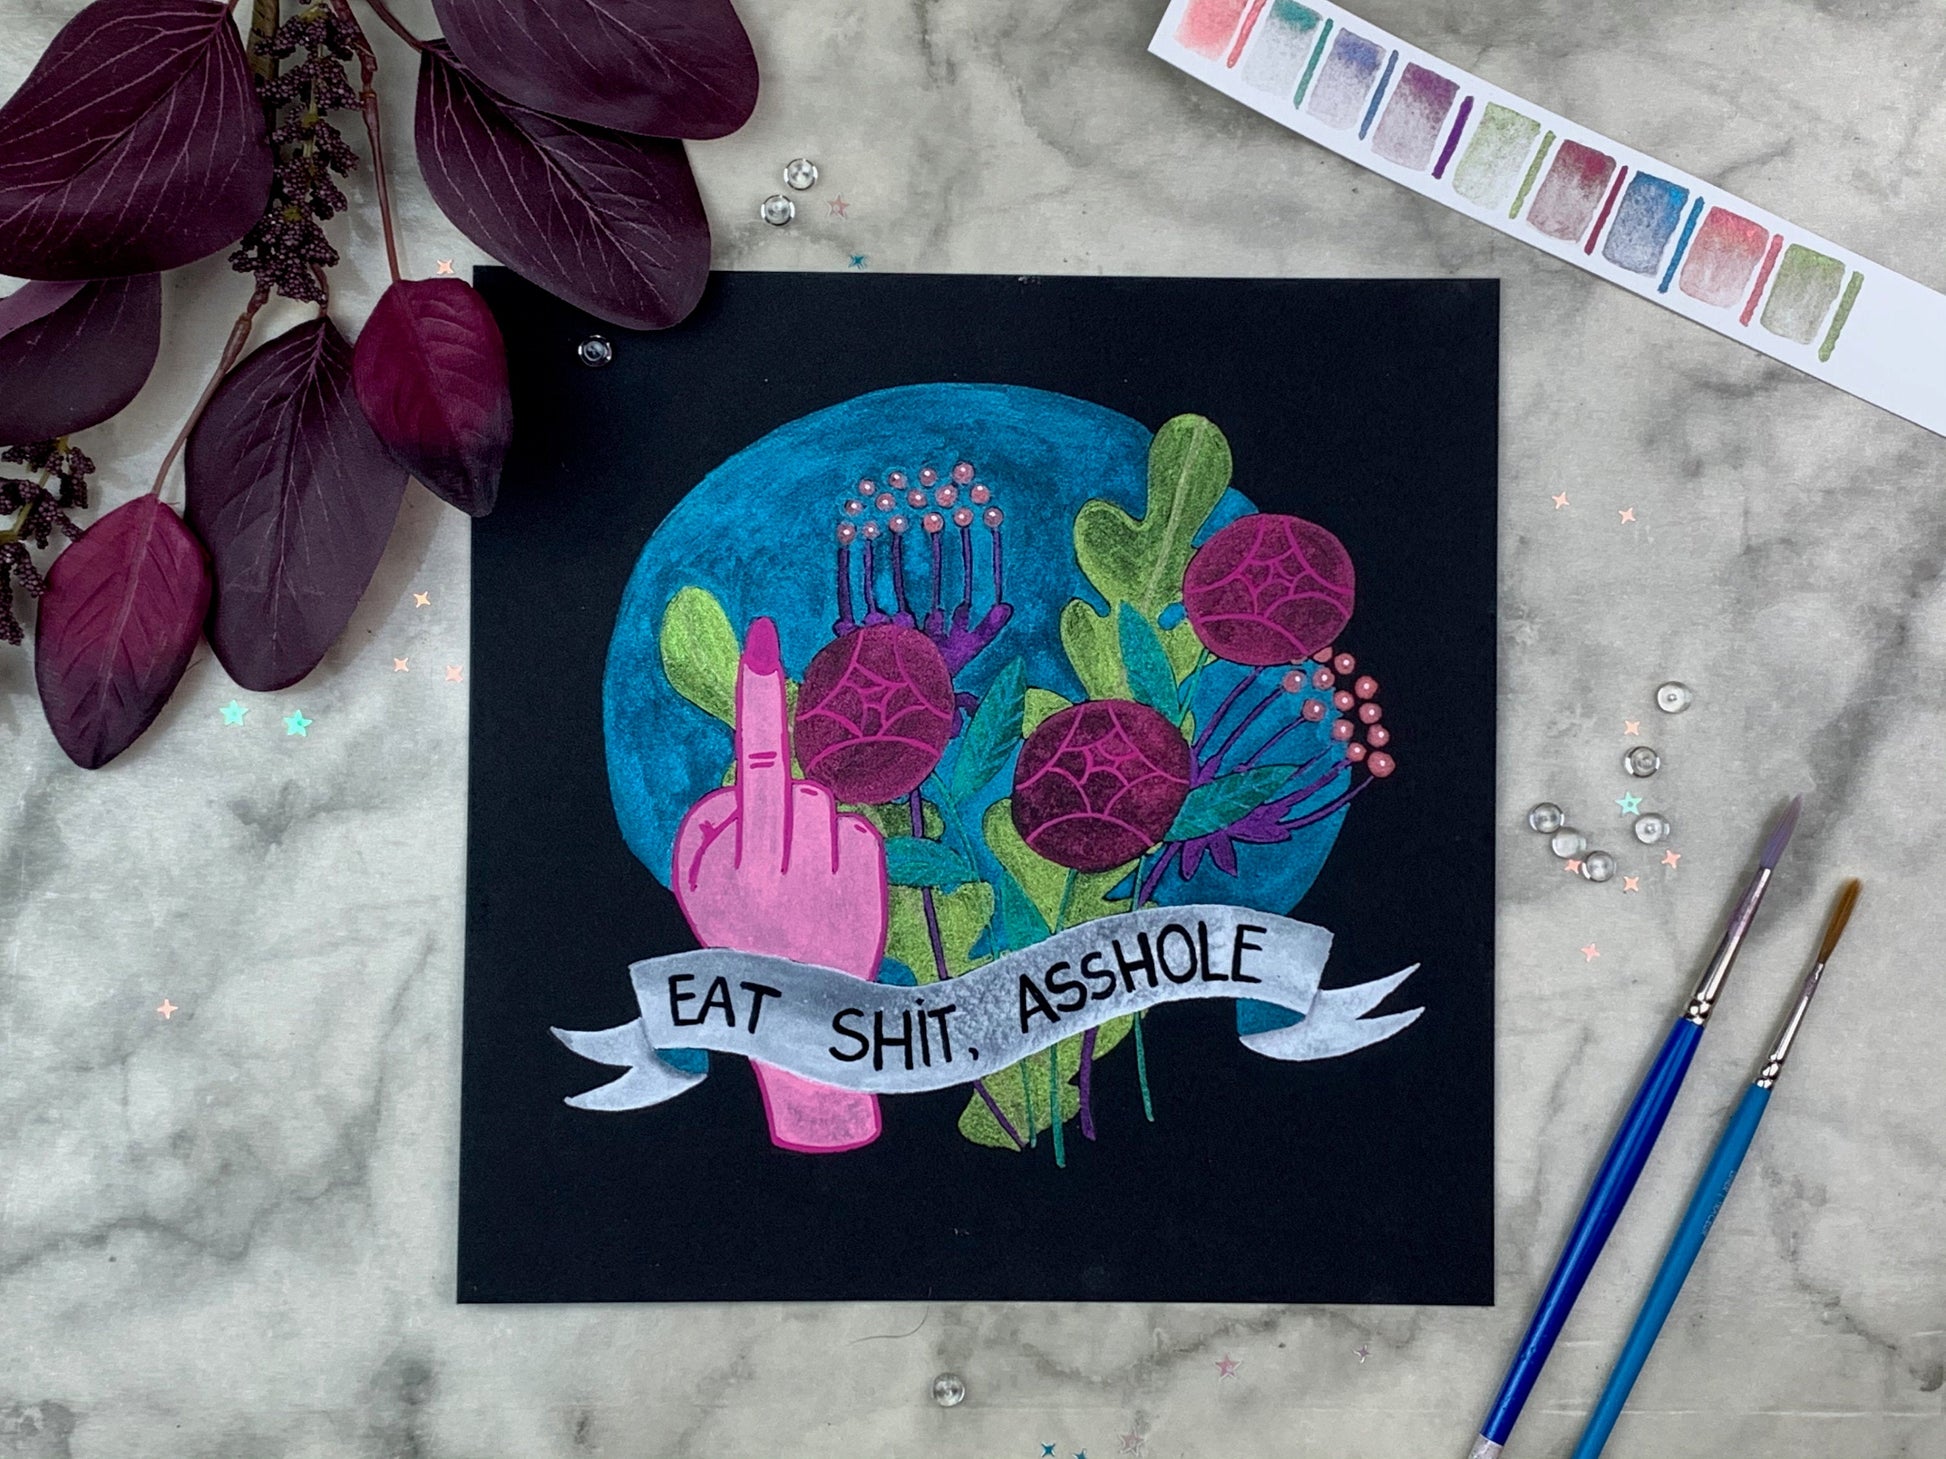 A painting of a hand "flipping the bird" with a bouquet of color shifting flowers behind it and a banner that says "Eat shit, asshole" in front.